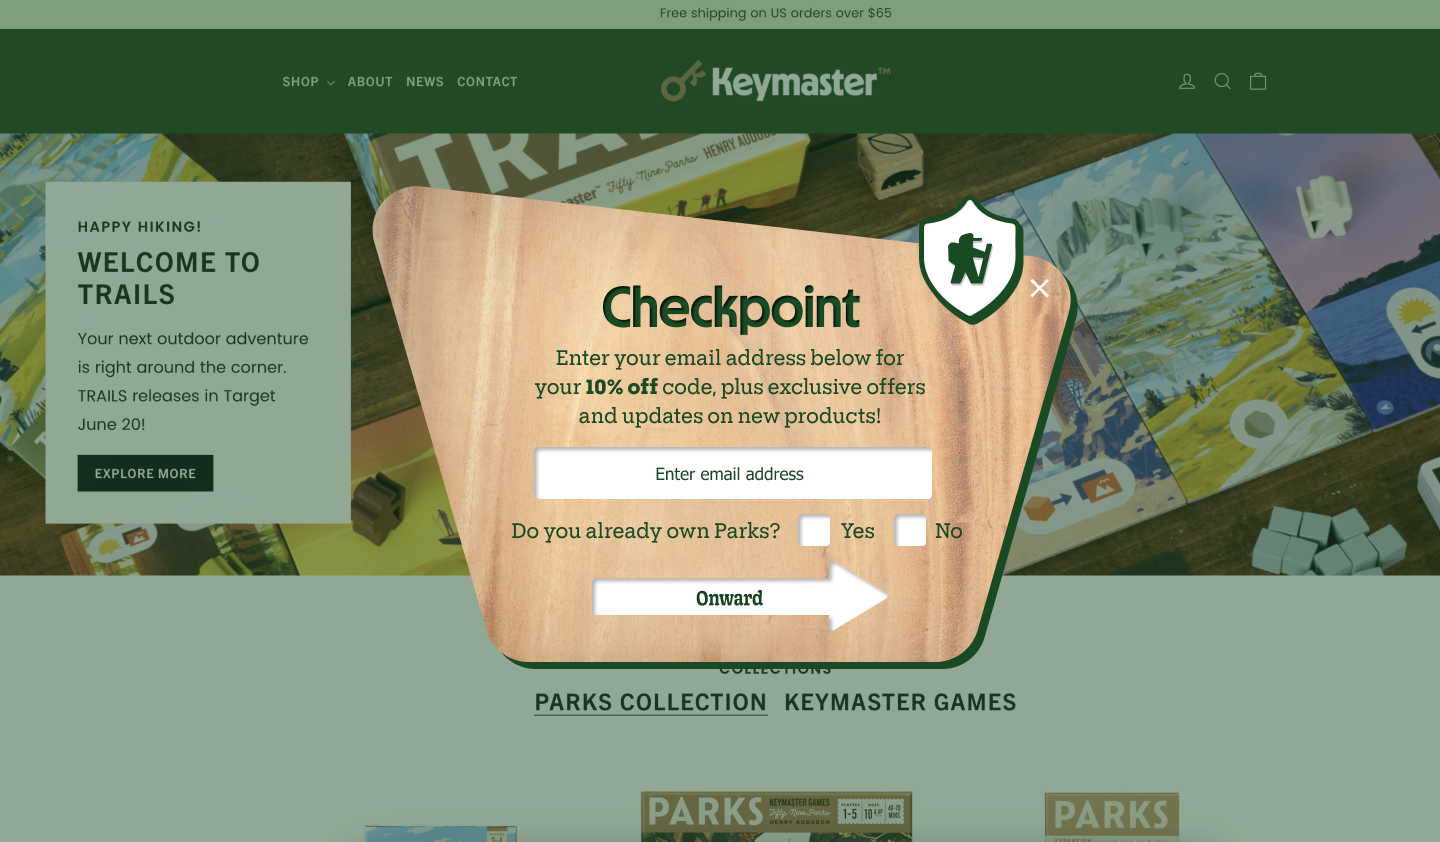 Keymaster games pop-up that asks if the customer has purchased their card game before